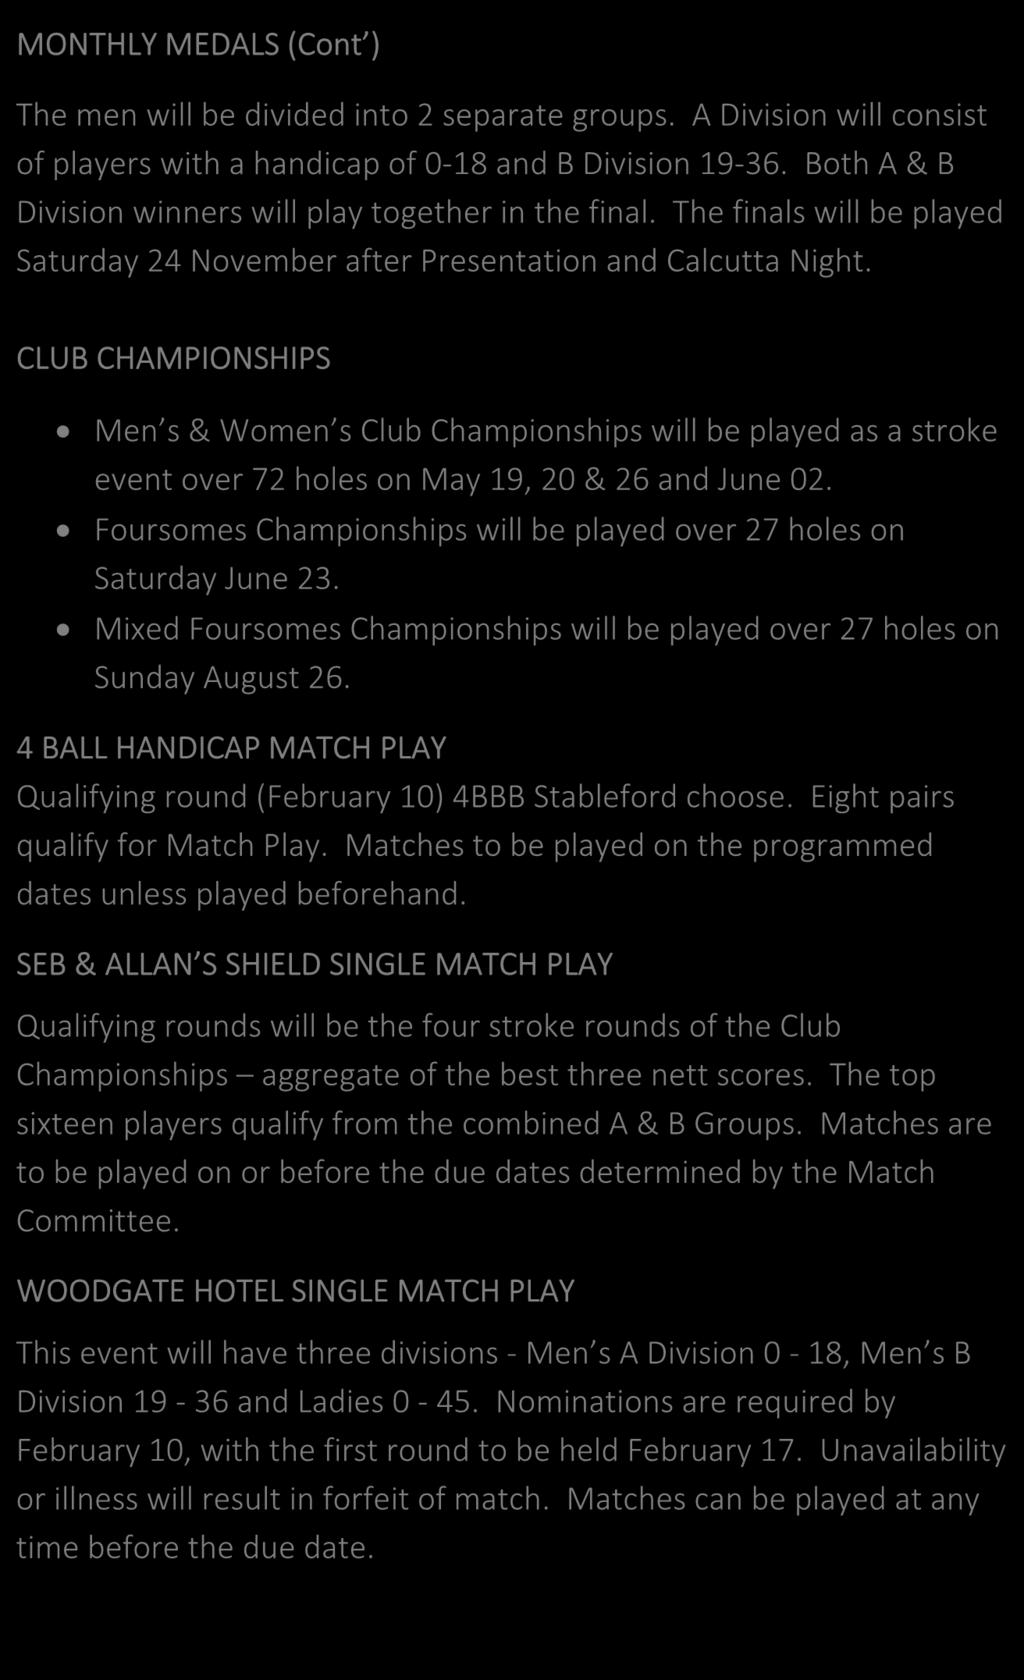 CLUB CHAMPIONSHIPS Men s & Women s Club Championships will be played as a stroke event over 72 holes on May 19, 20 & 26 and June 02.